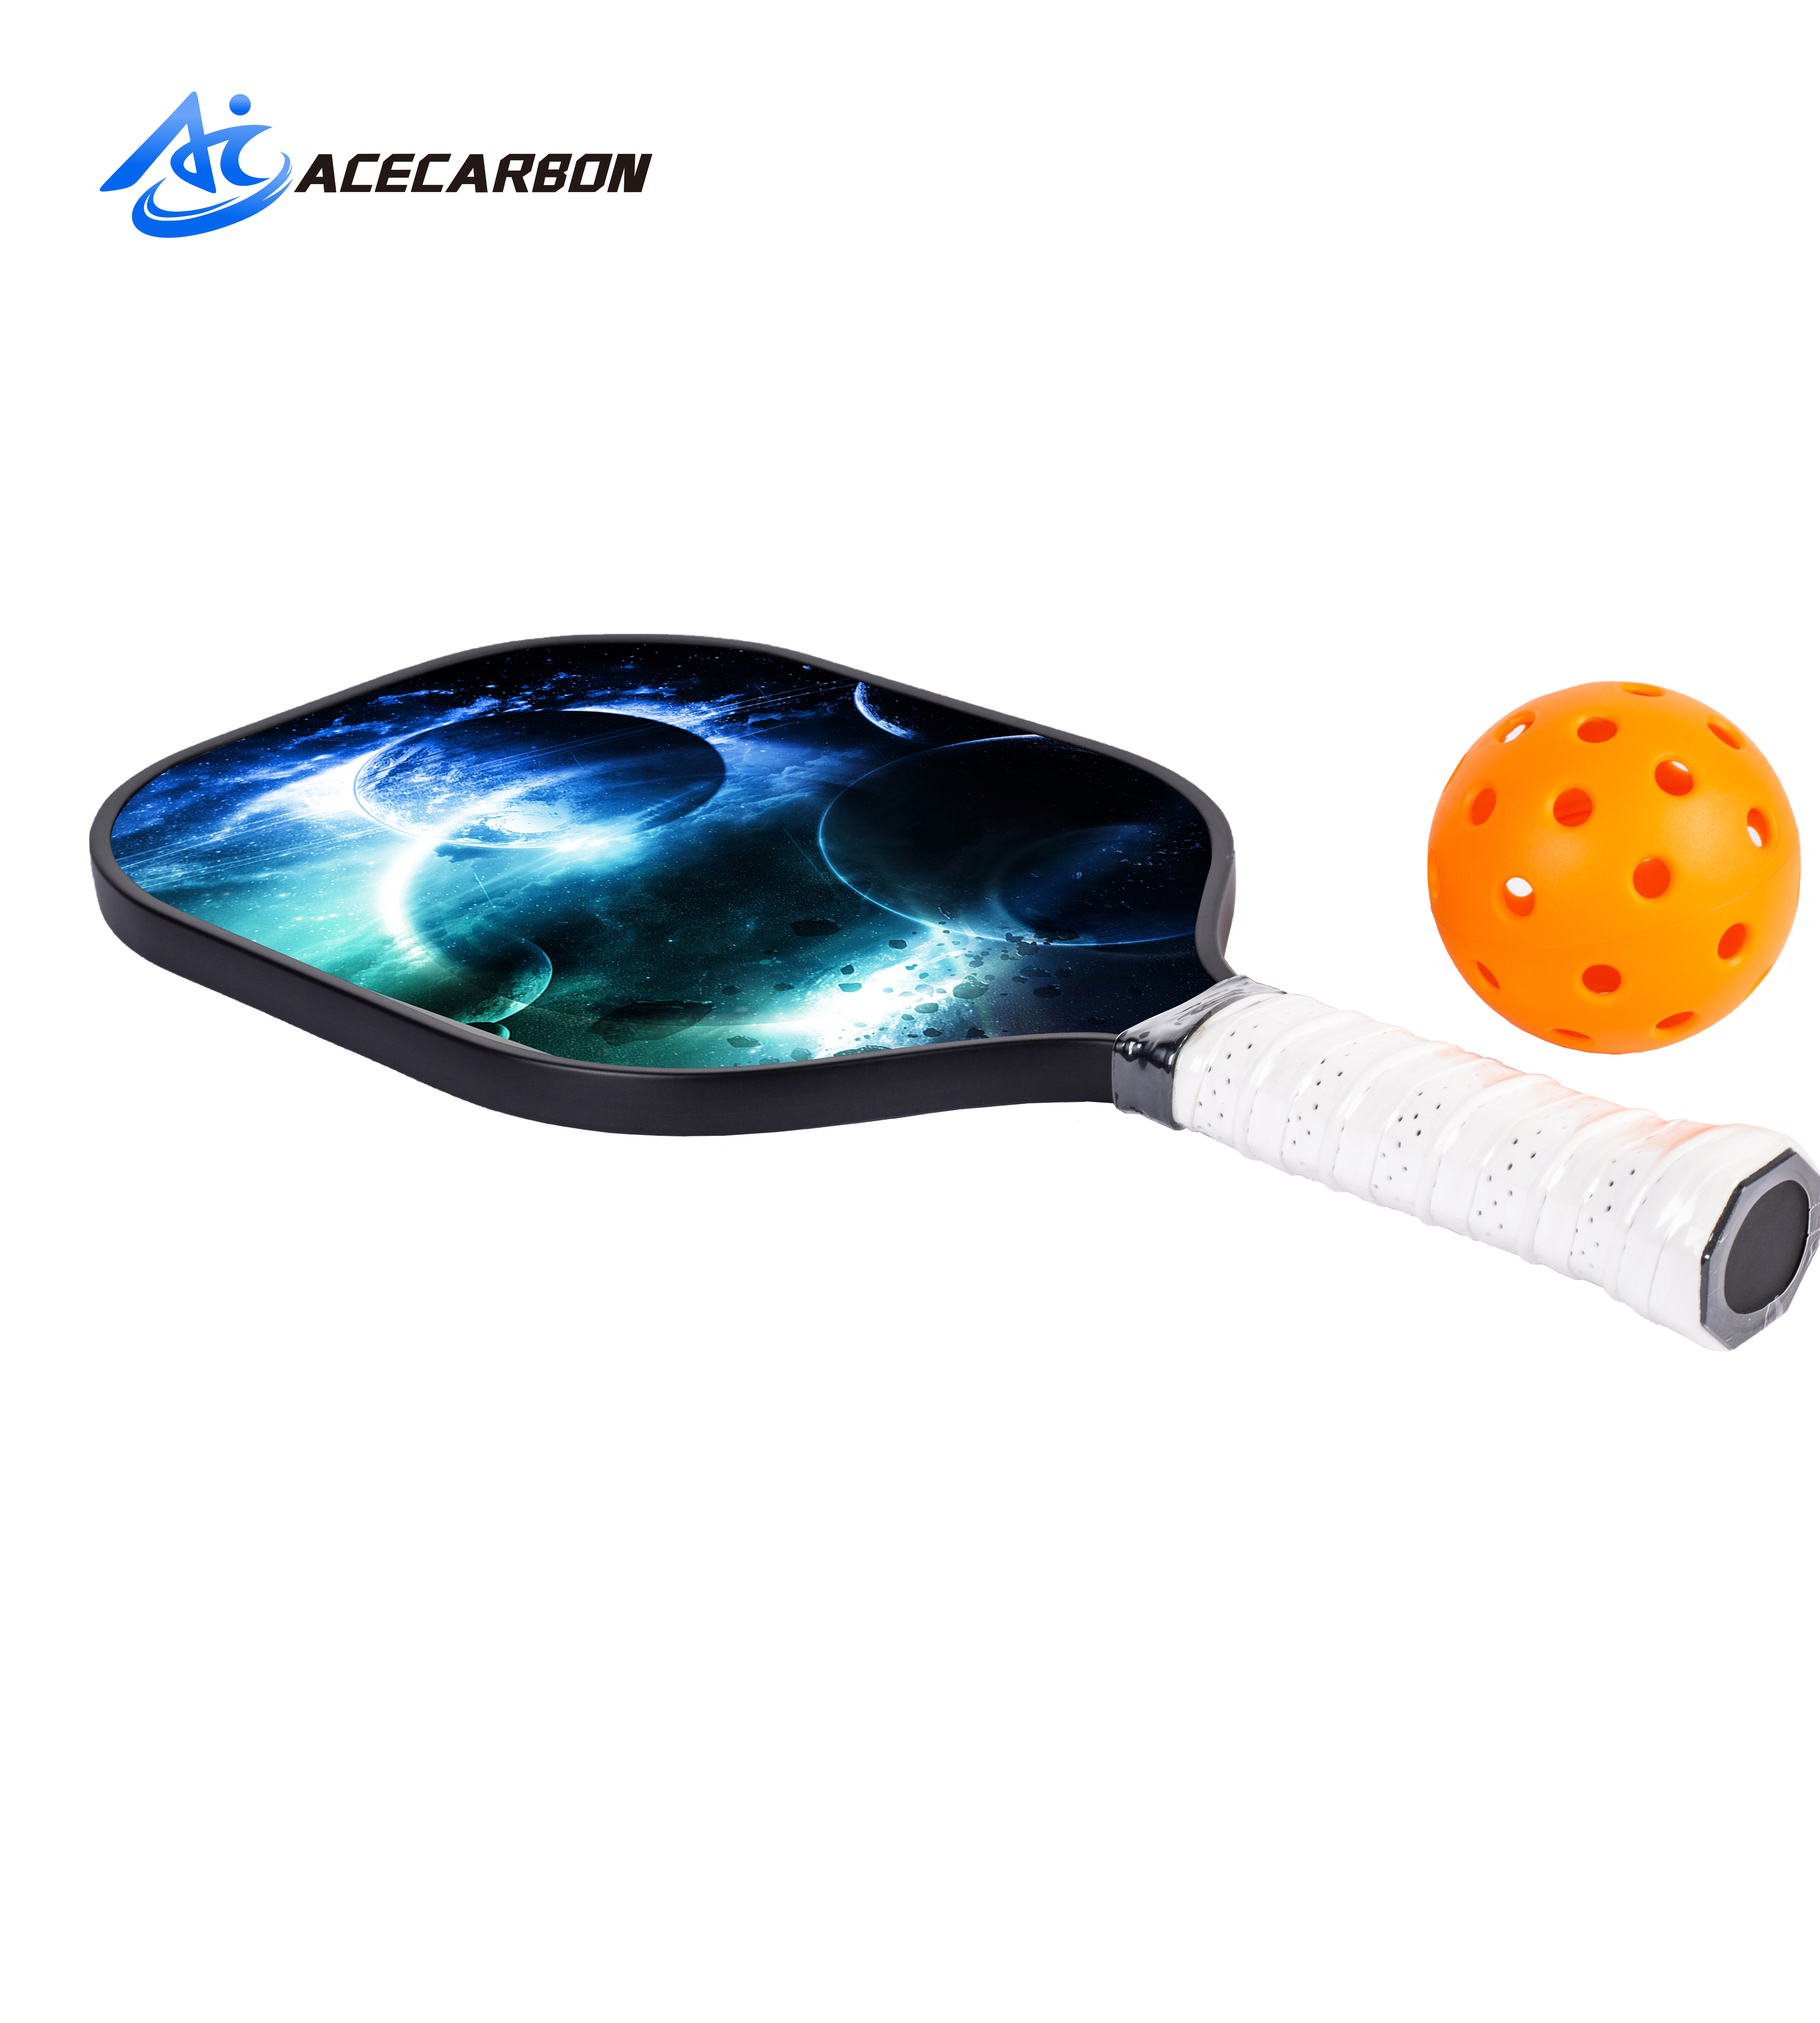 ACECARBON's Pickleball Precision: Crafting Rackets for Accuracy and Control